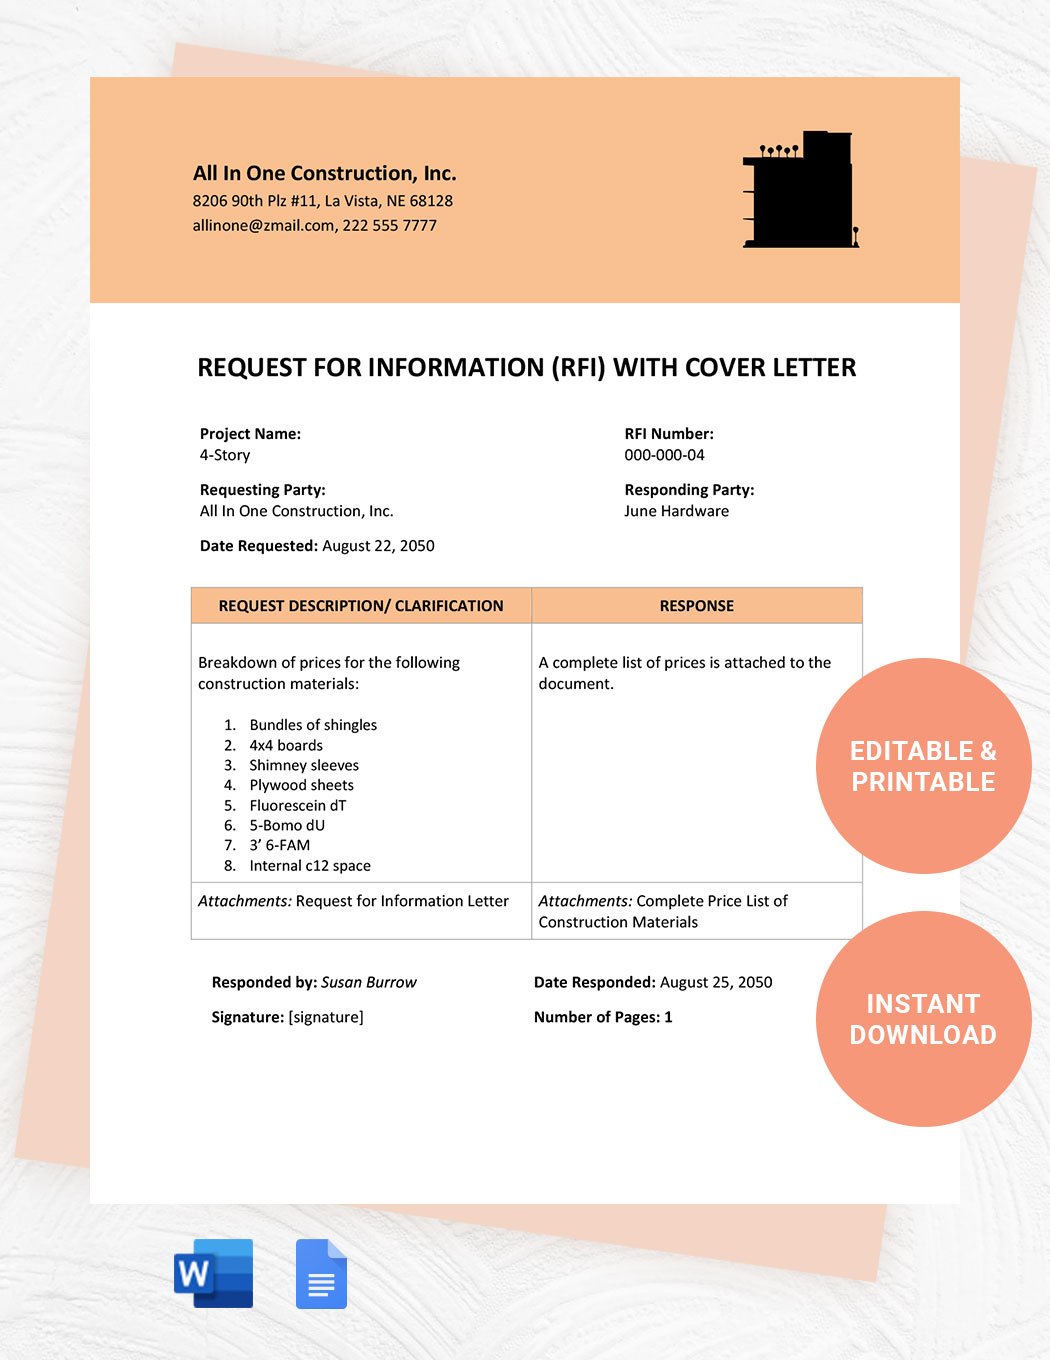 Request For Information With Cover Letter Template in Word, Google Docs